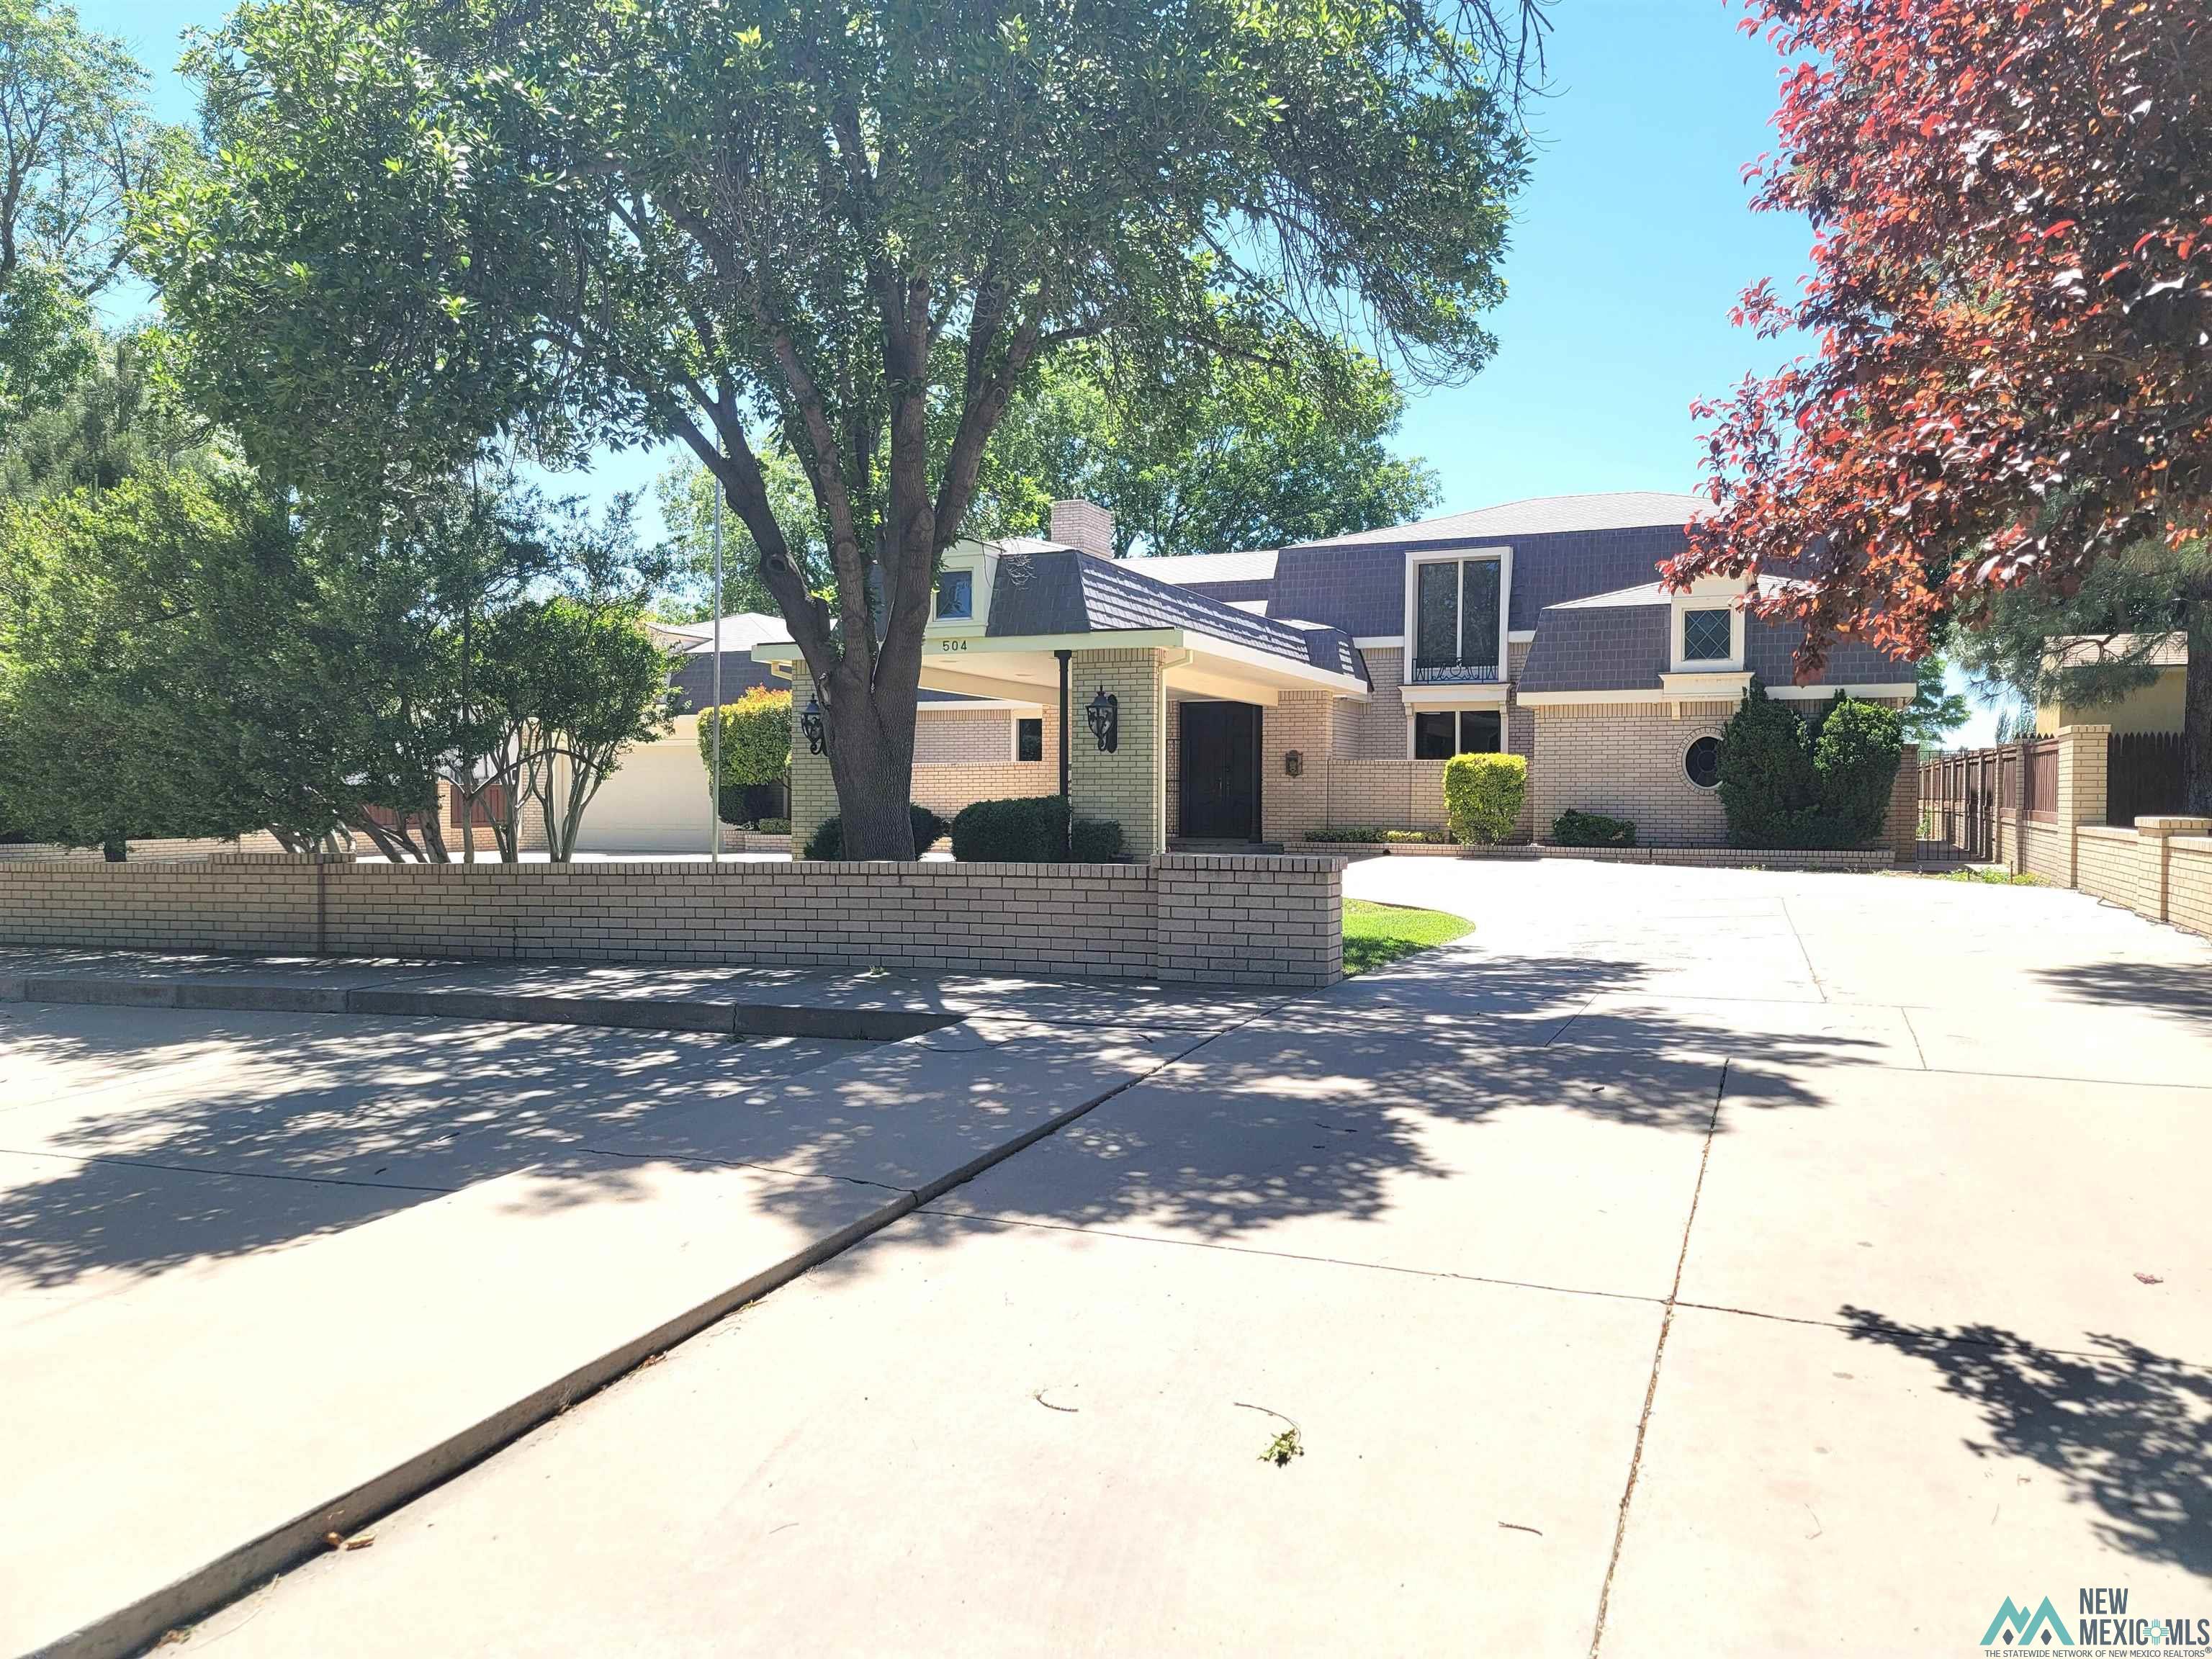 504N Wyoming Ave. Roswell, NM Photo